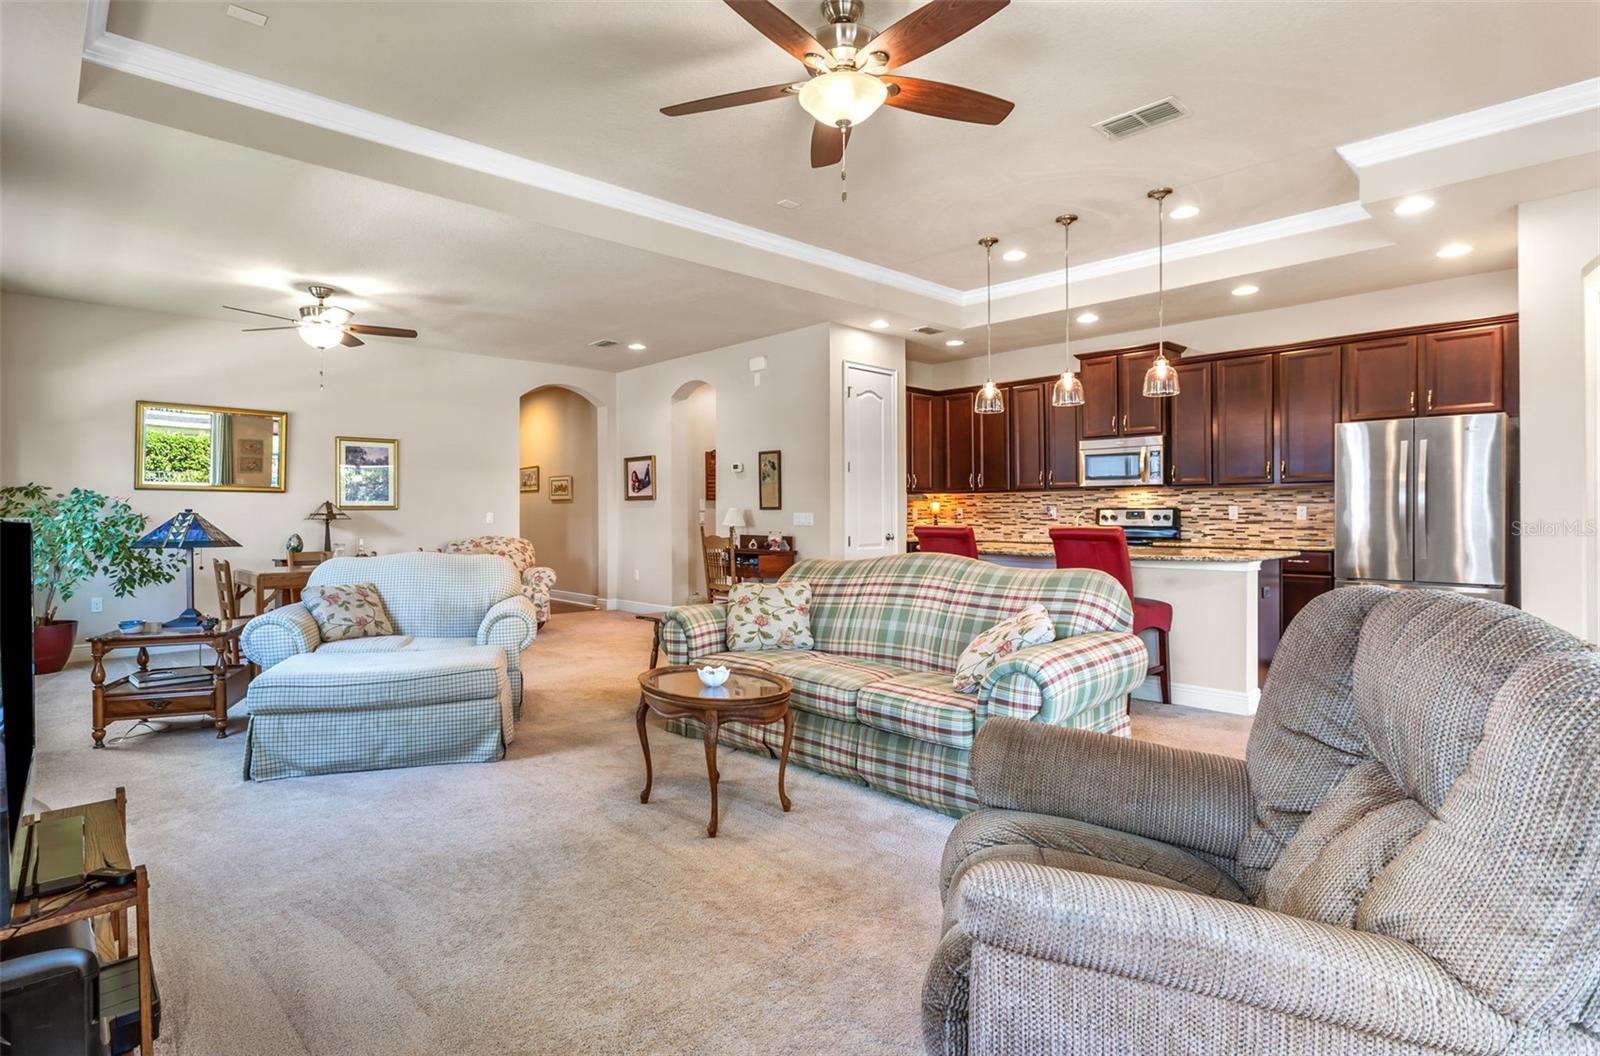 Spacious Great Room for Casual Living or More Formal Set Up. Nice Tray Ceiling